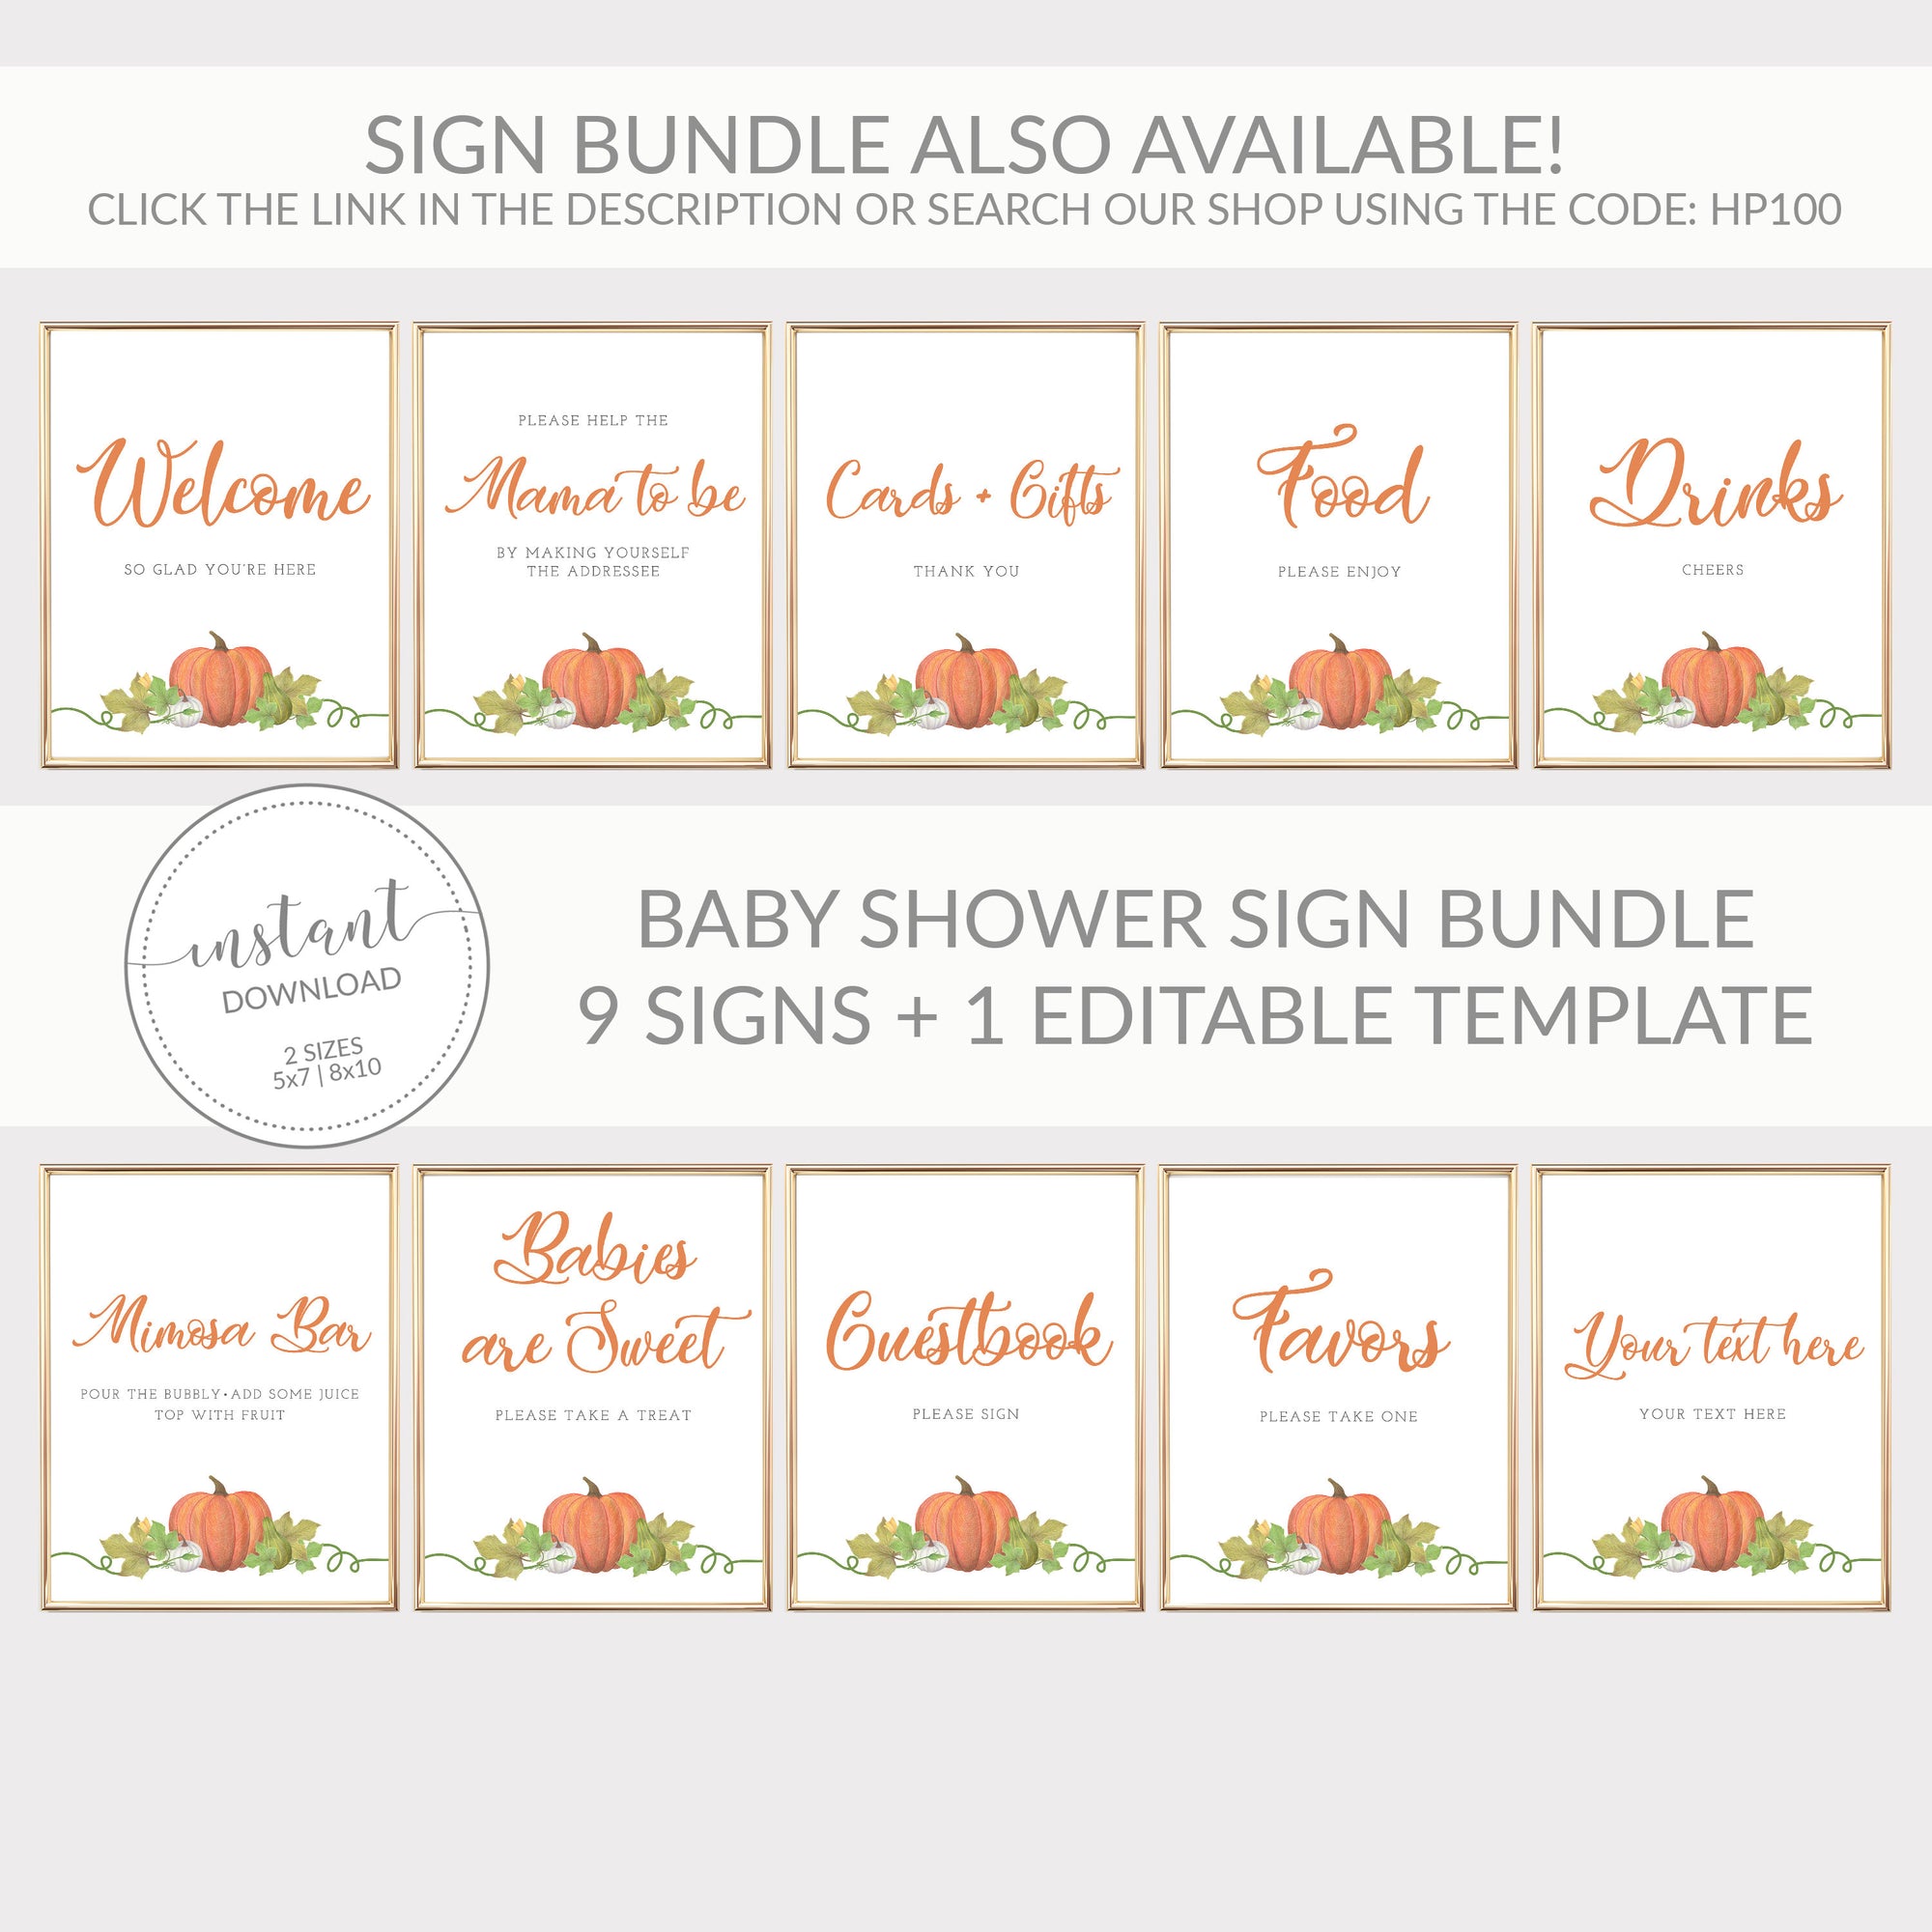 Little Pumpkin Baby Shower Sanitize Before Snuggles Sign, Printable Sip and See Welcome Sign, INSTANT DOWNLOAD - HP100